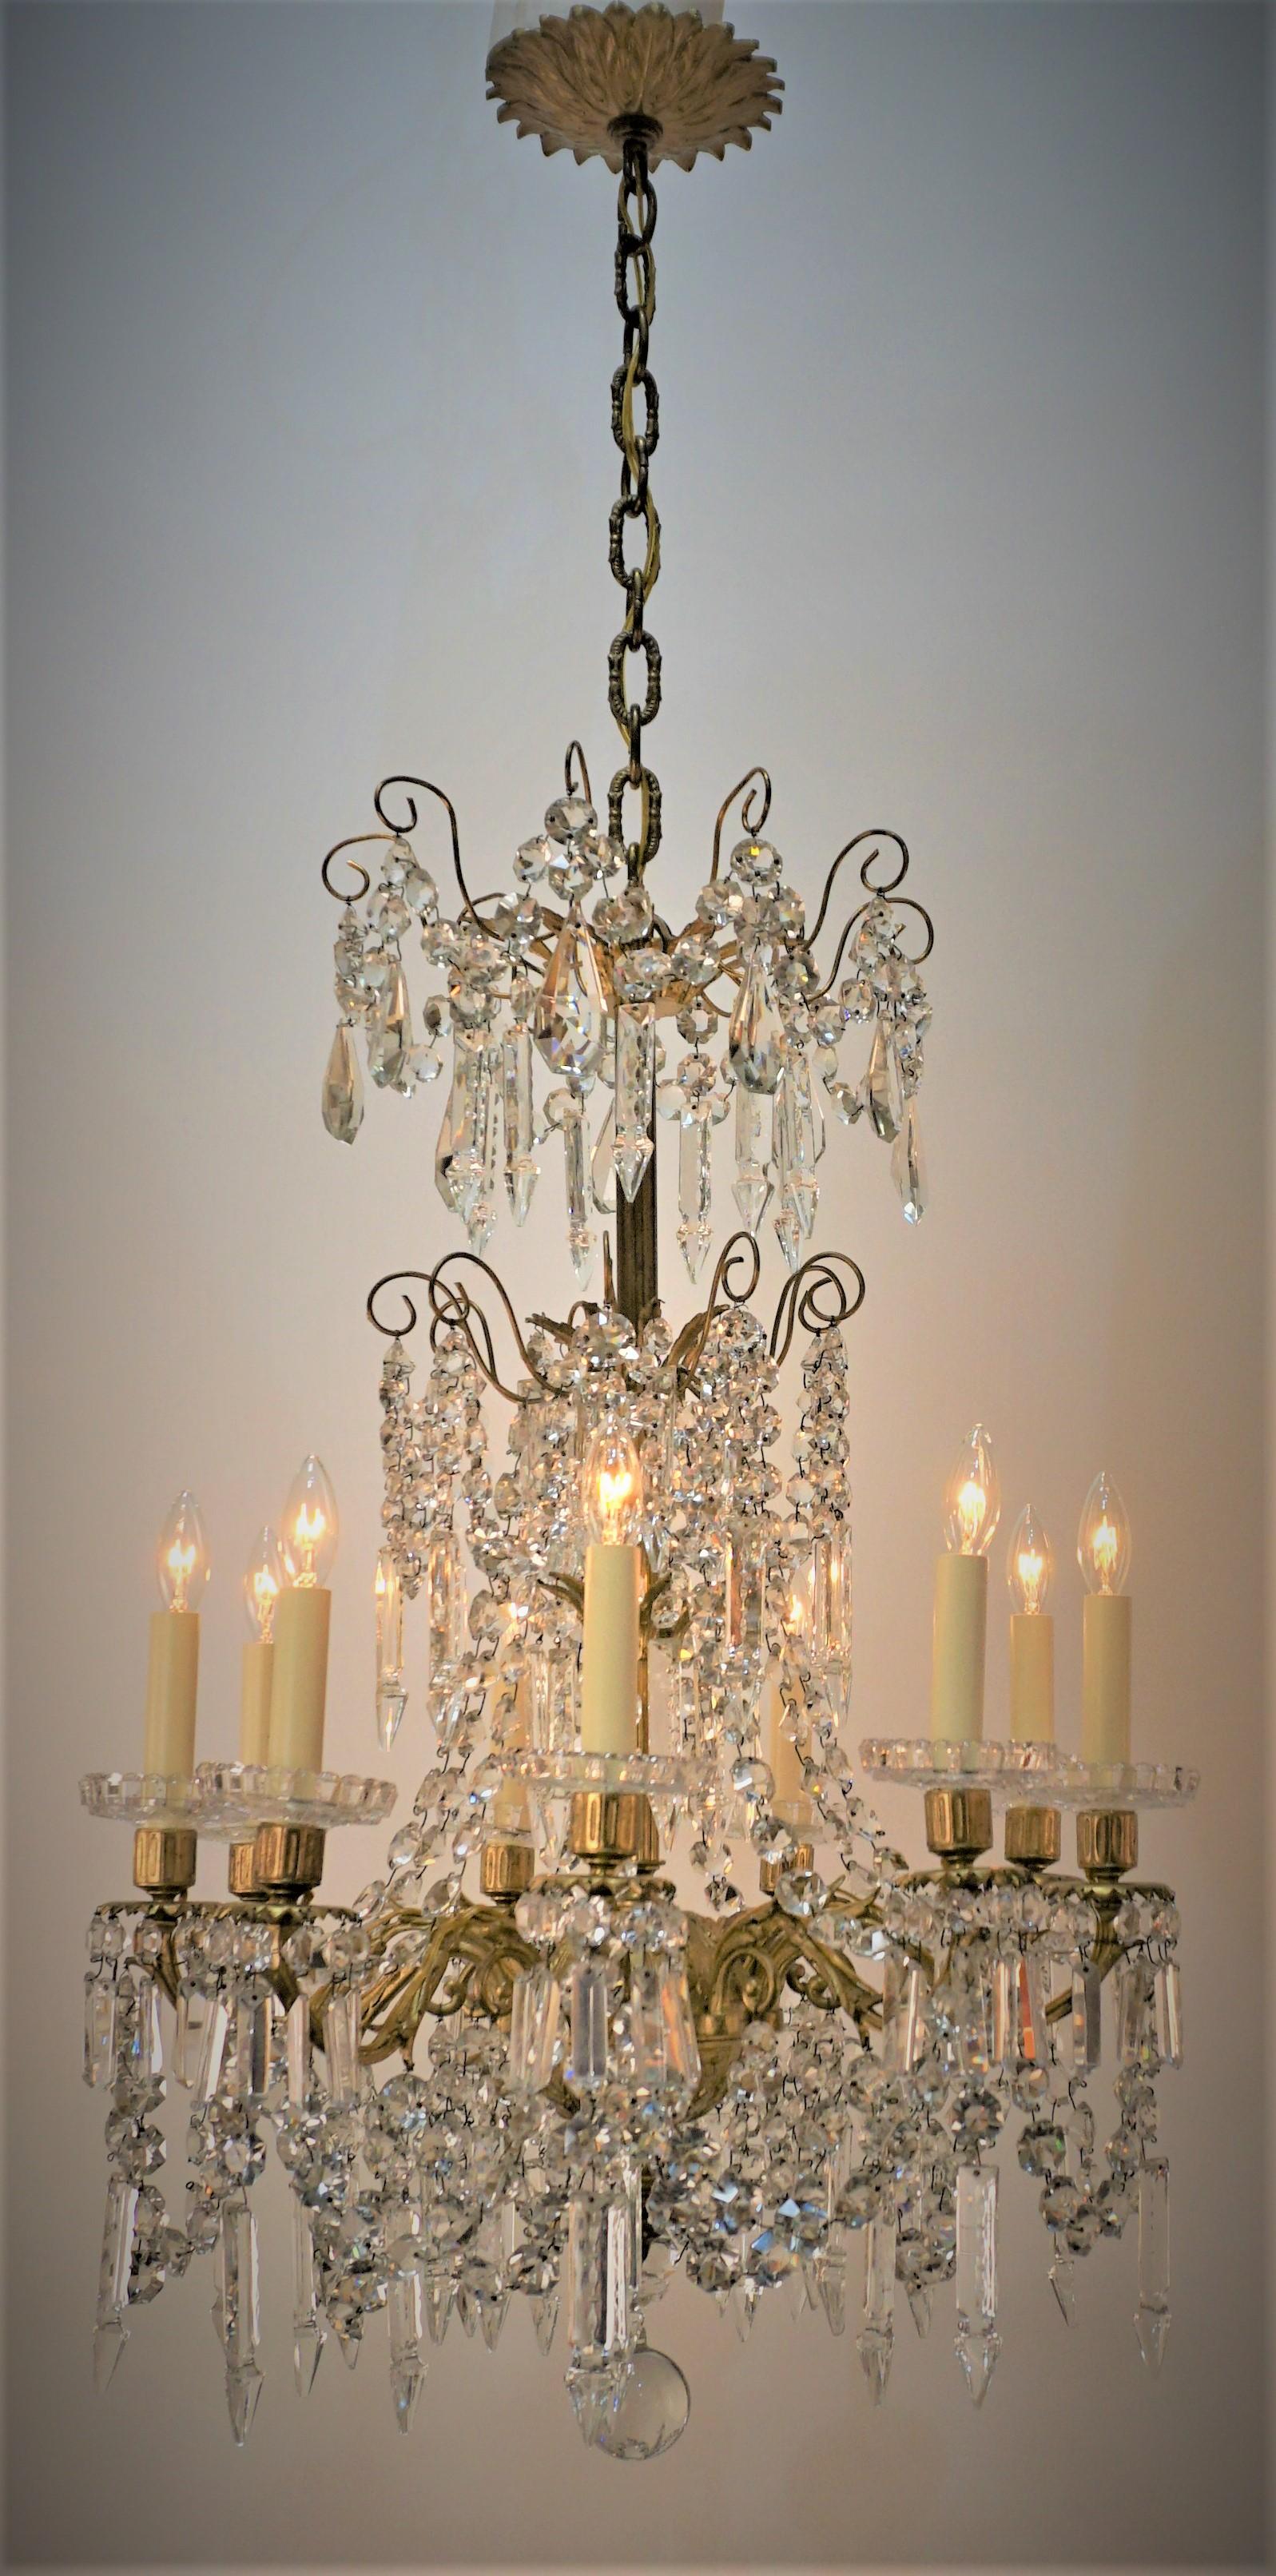 This amazing 19th century French crystal and bronze chandelier professionally electrified with nine lights.
Measurement: 22